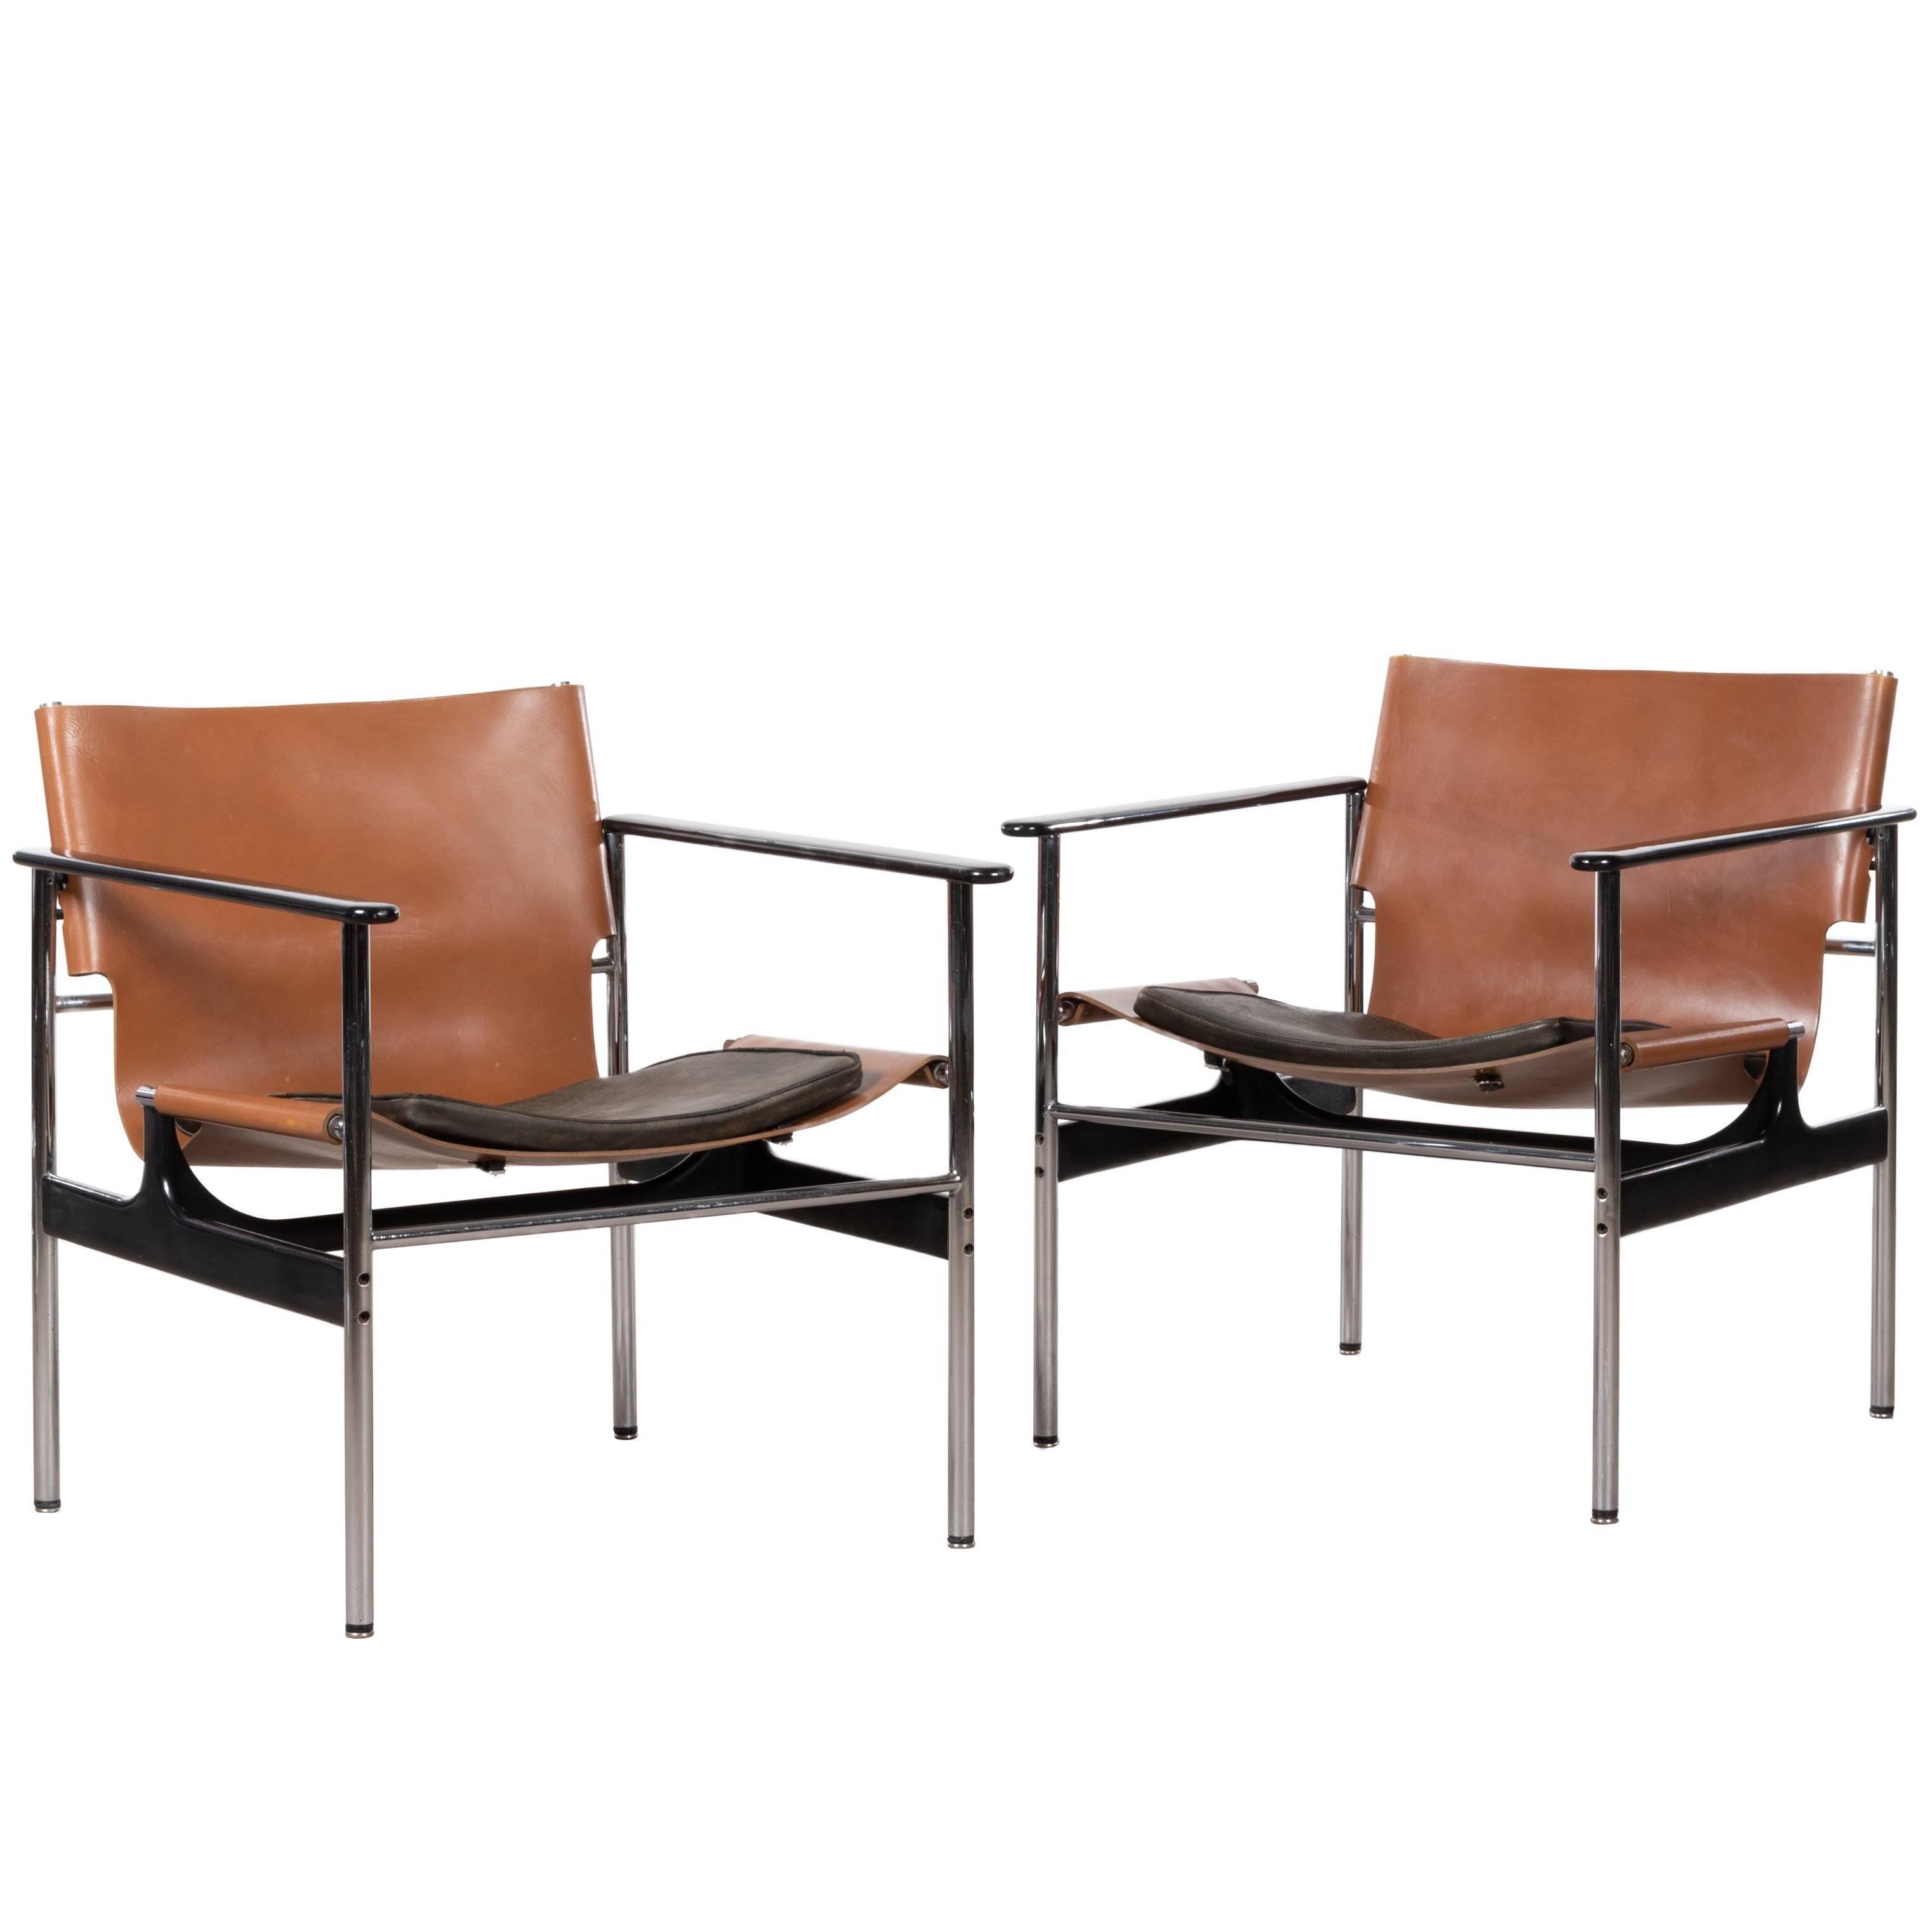 Charles Pollock Lounge Armchairs Model 657 for Knoll in Cognac Saddle Leather